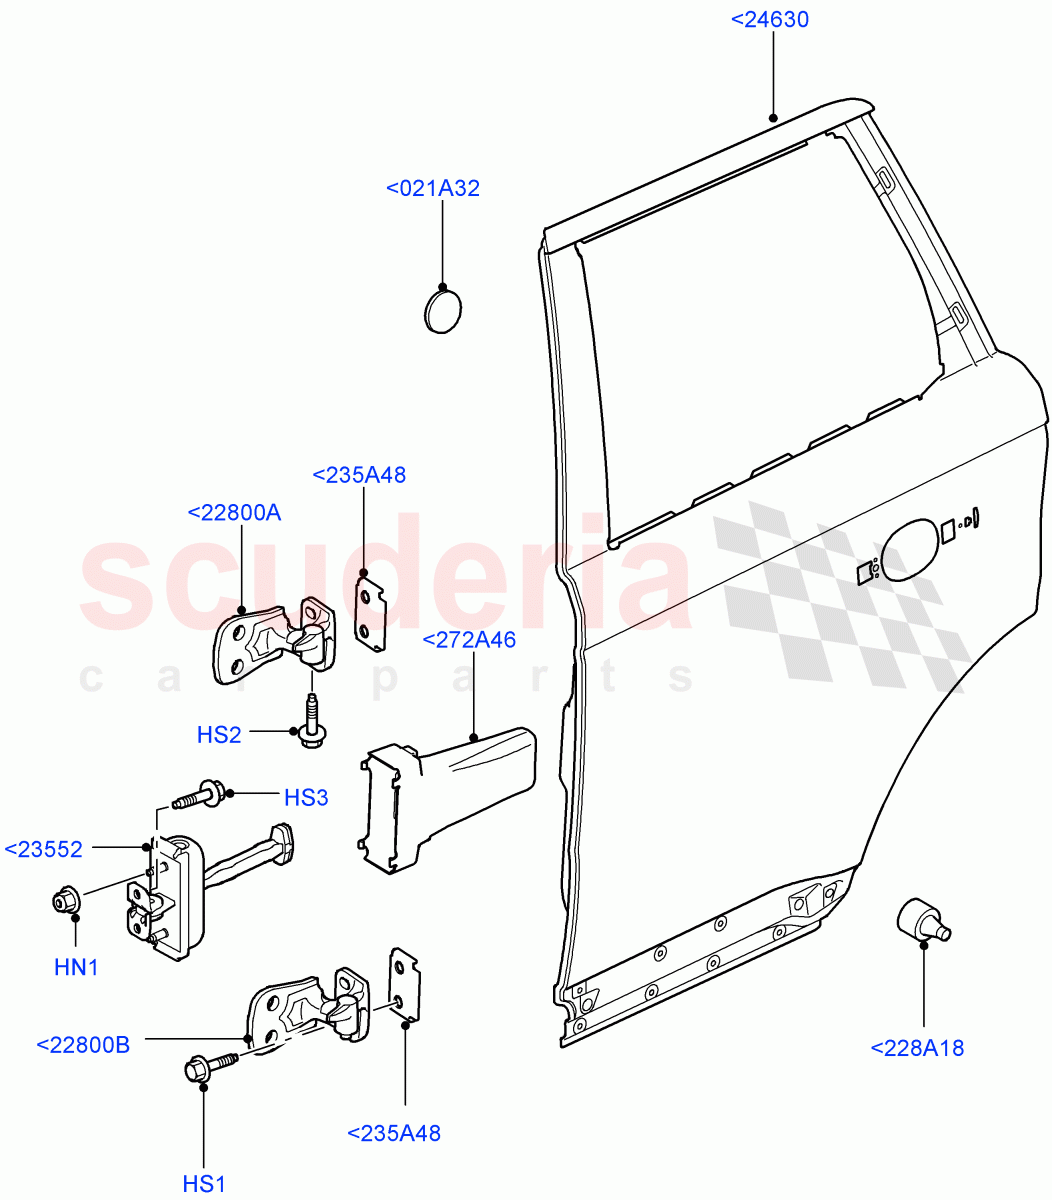 Rear Doors, Hinges & Weatherstrips(Door And Fixings)((V)TO9A999999) of Land Rover Land Rover Range Rover Sport (2005-2009) [3.6 V8 32V DOHC EFI Diesel]